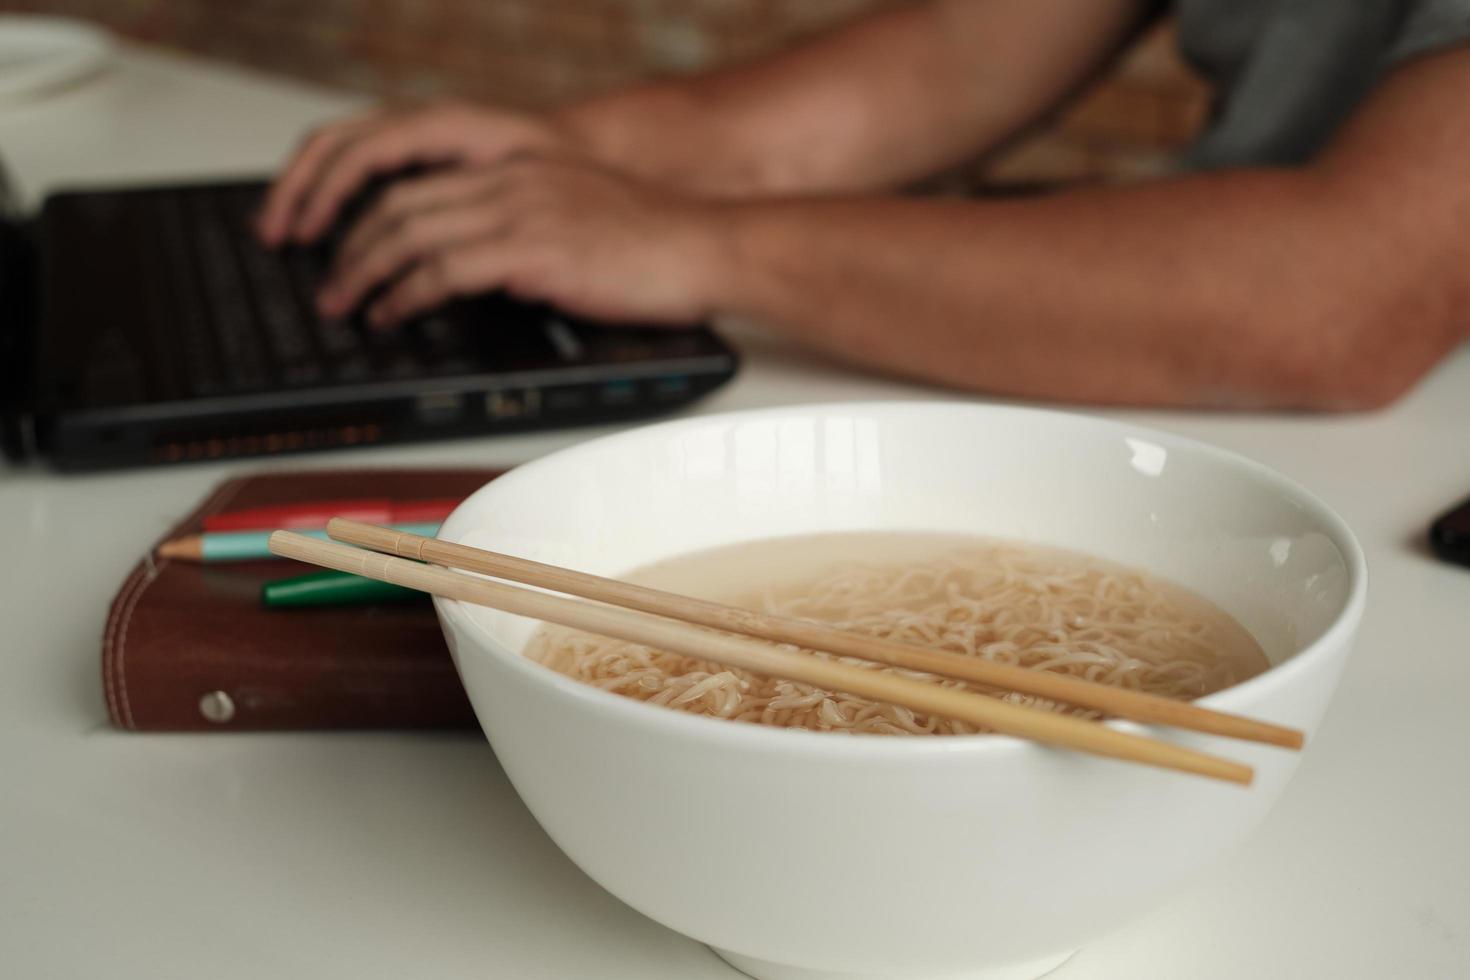 Thai male worker busy working with laptop, use chopsticks to hastily eat instant noodles during office lunch's break, because quick, tasty, and cheap. Over time Asian fast food, unhealthy lifestyle. photo